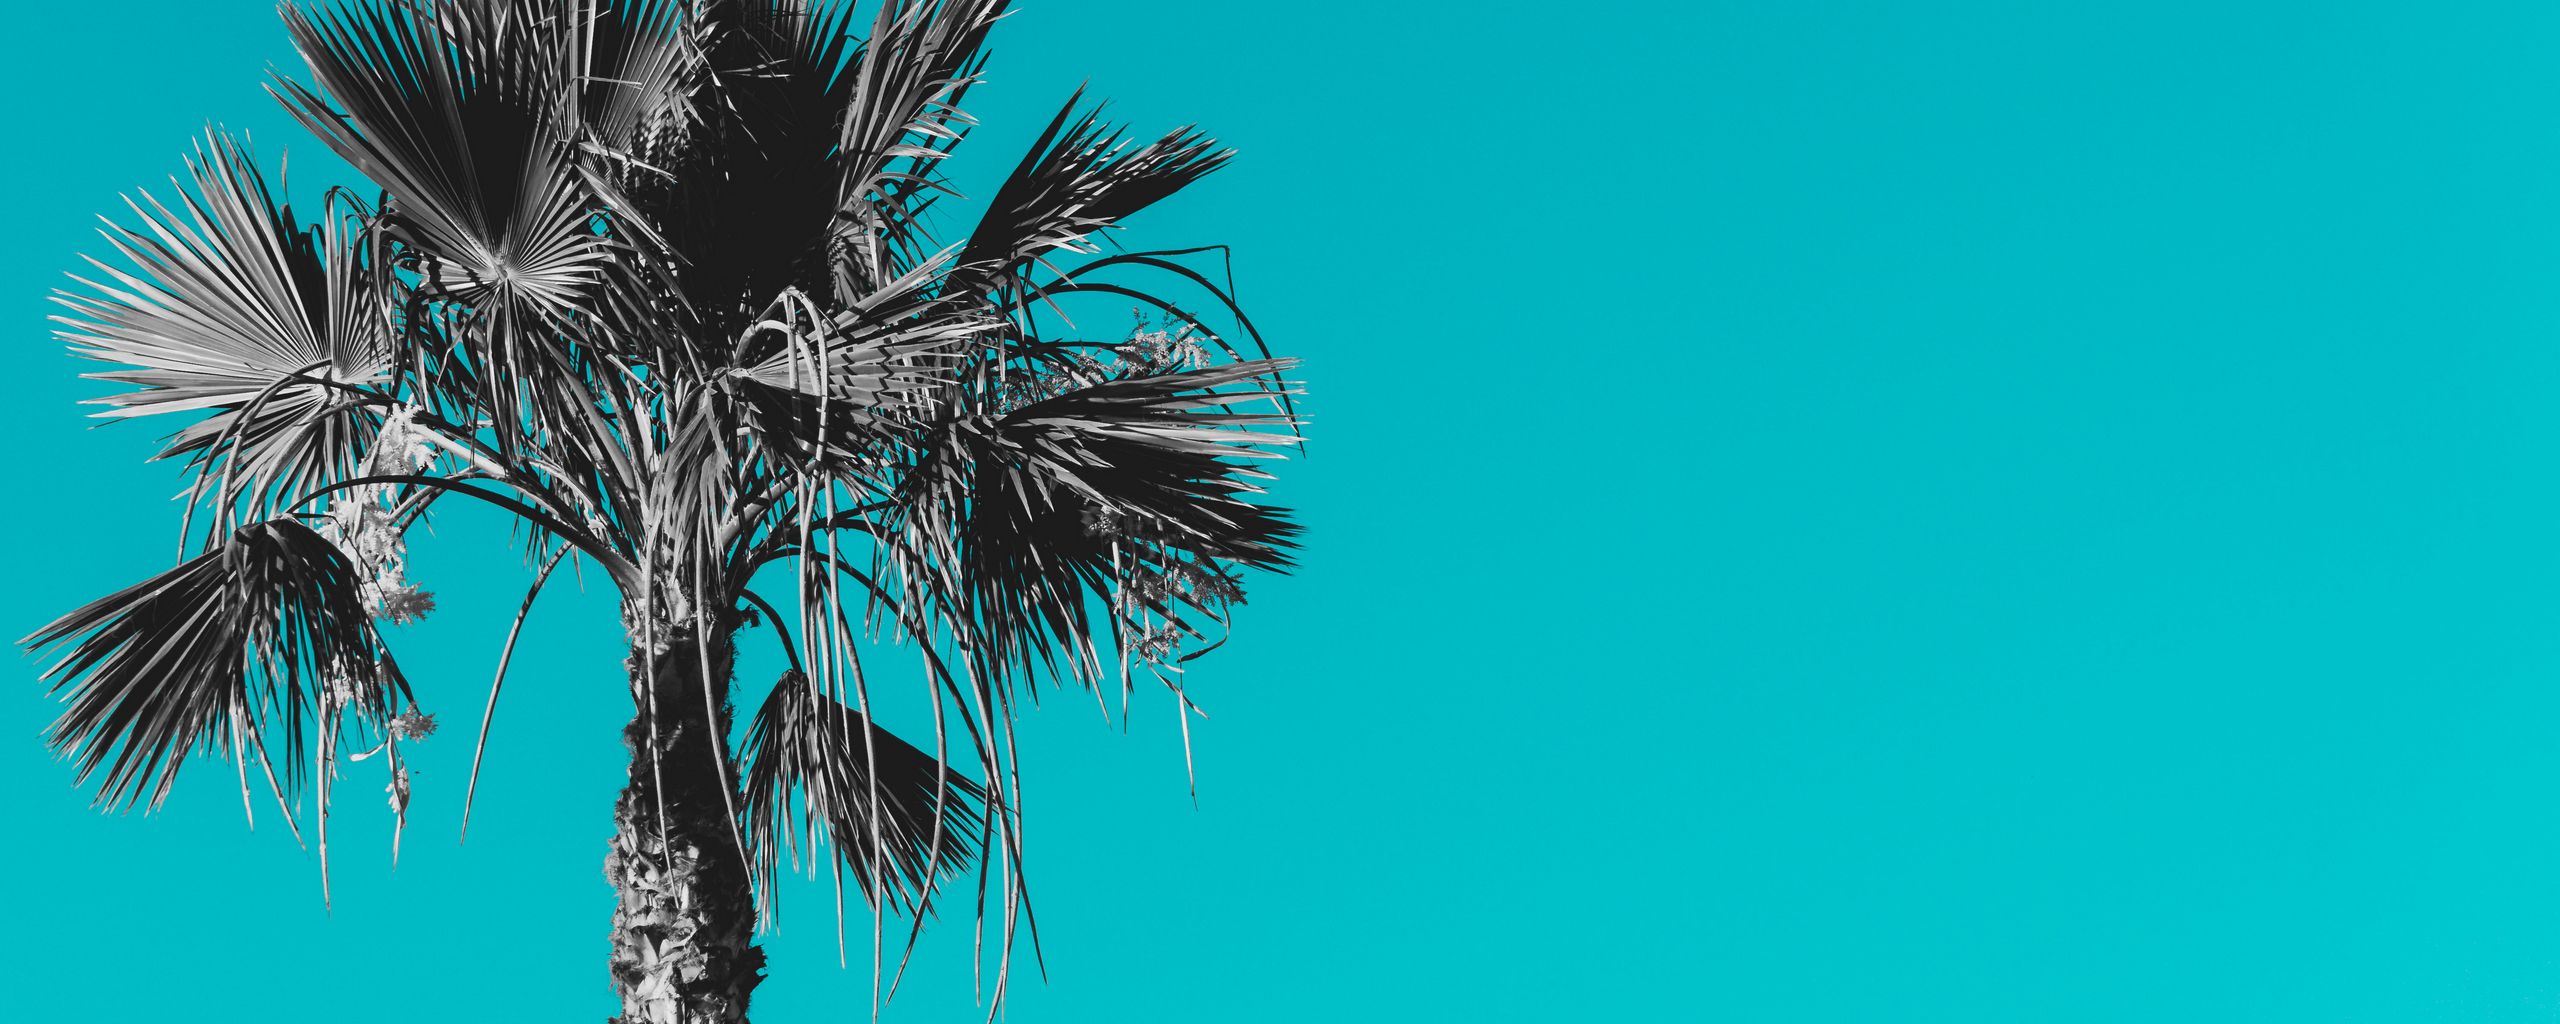 Download wallpaper 2560x1024 palm, tree, background, grey, blue ...